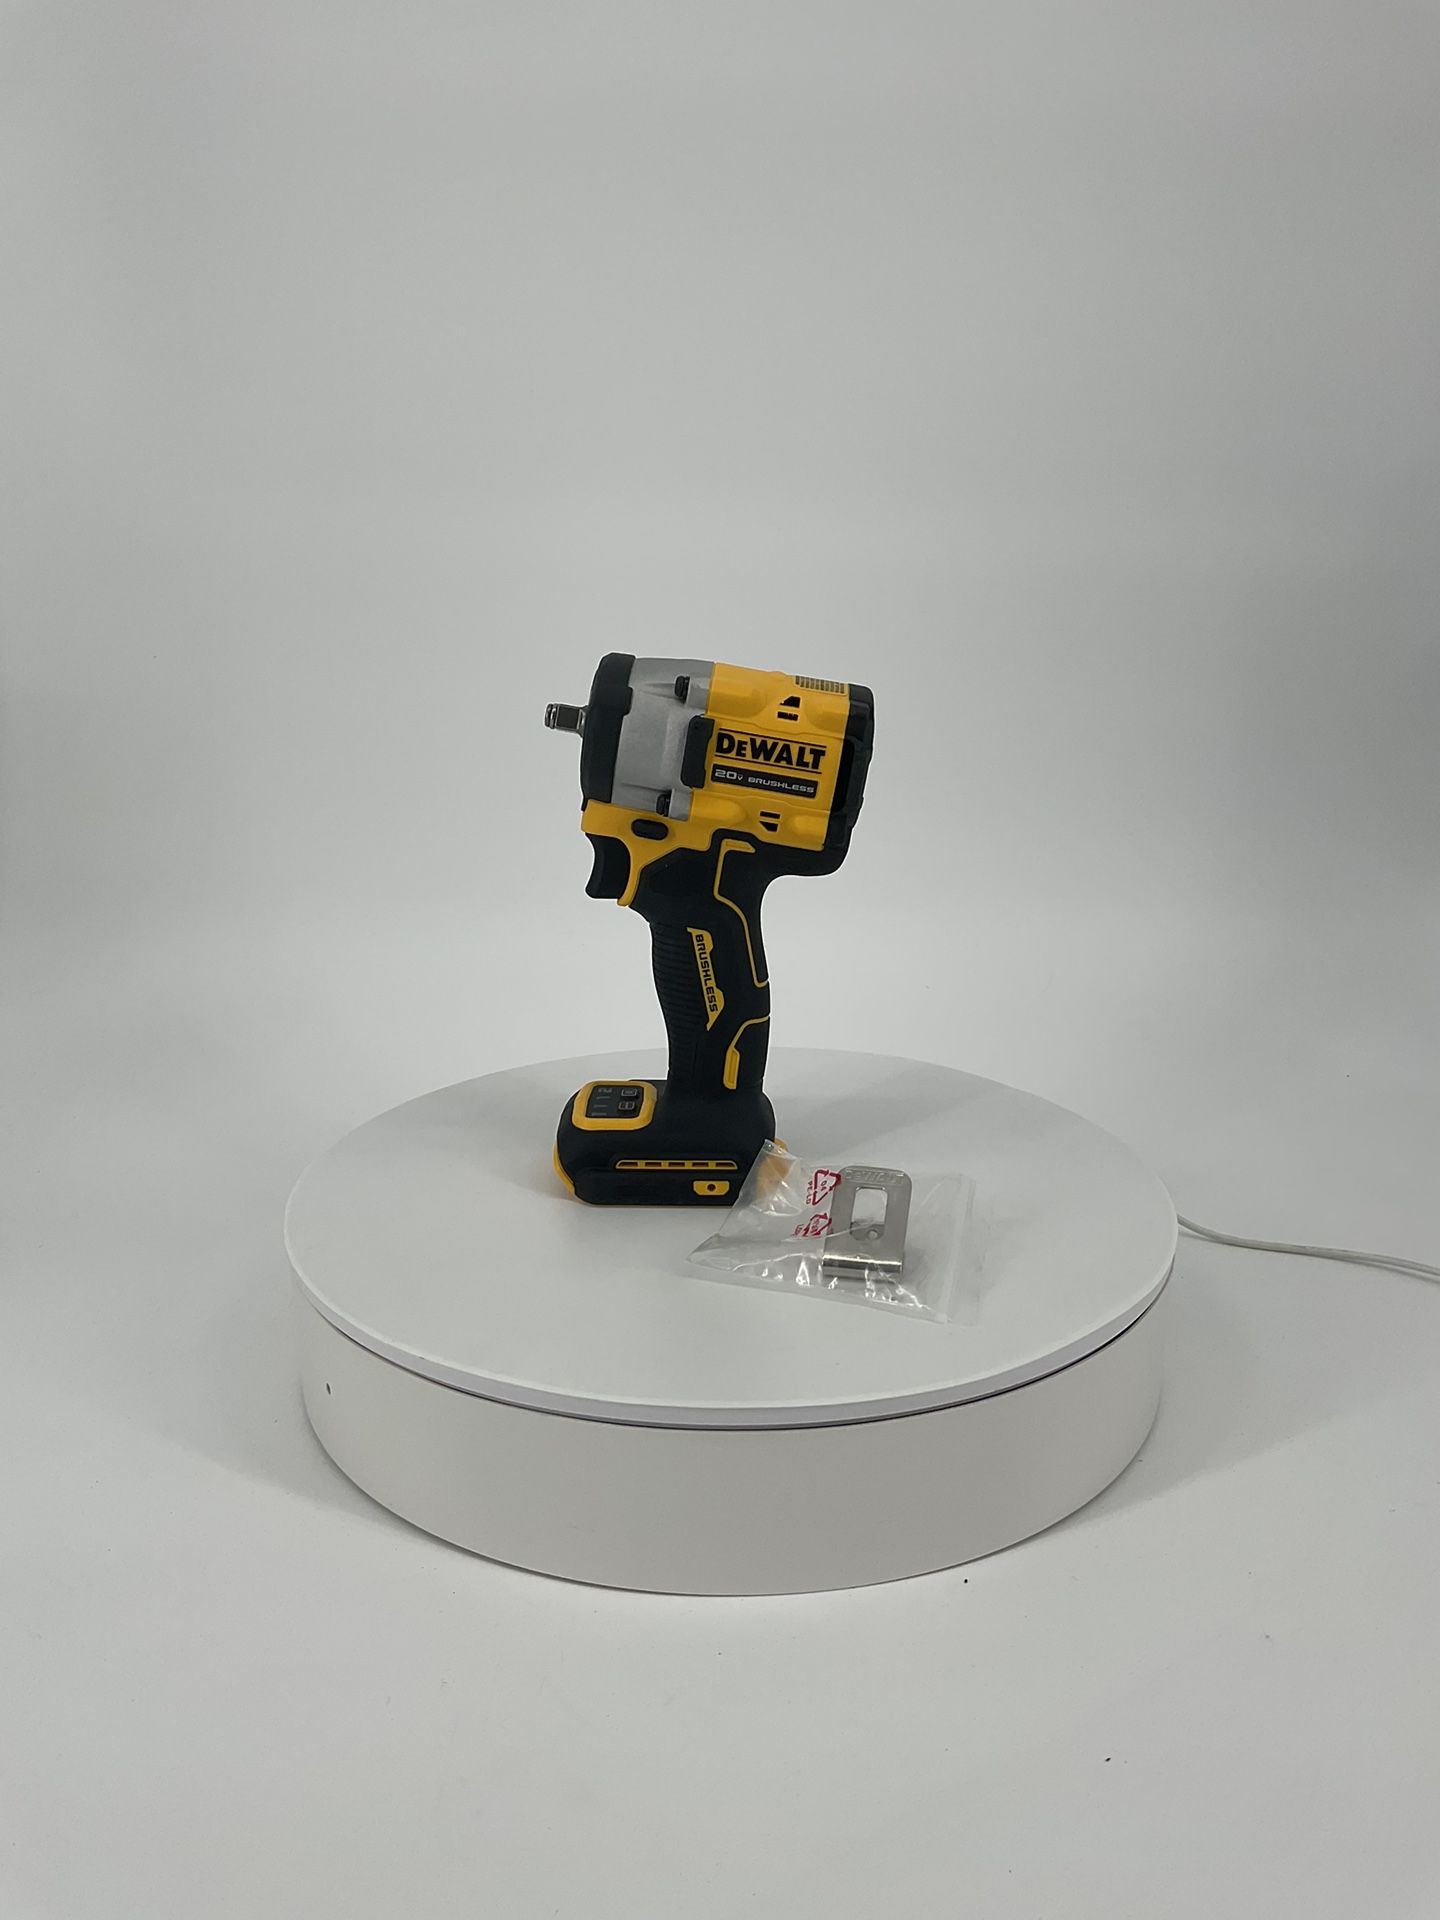 DEWALT ATOMIC 20V MAX Cordless Brushless 3/8 in.Variable Speed Impact Wrench (Tool Only)